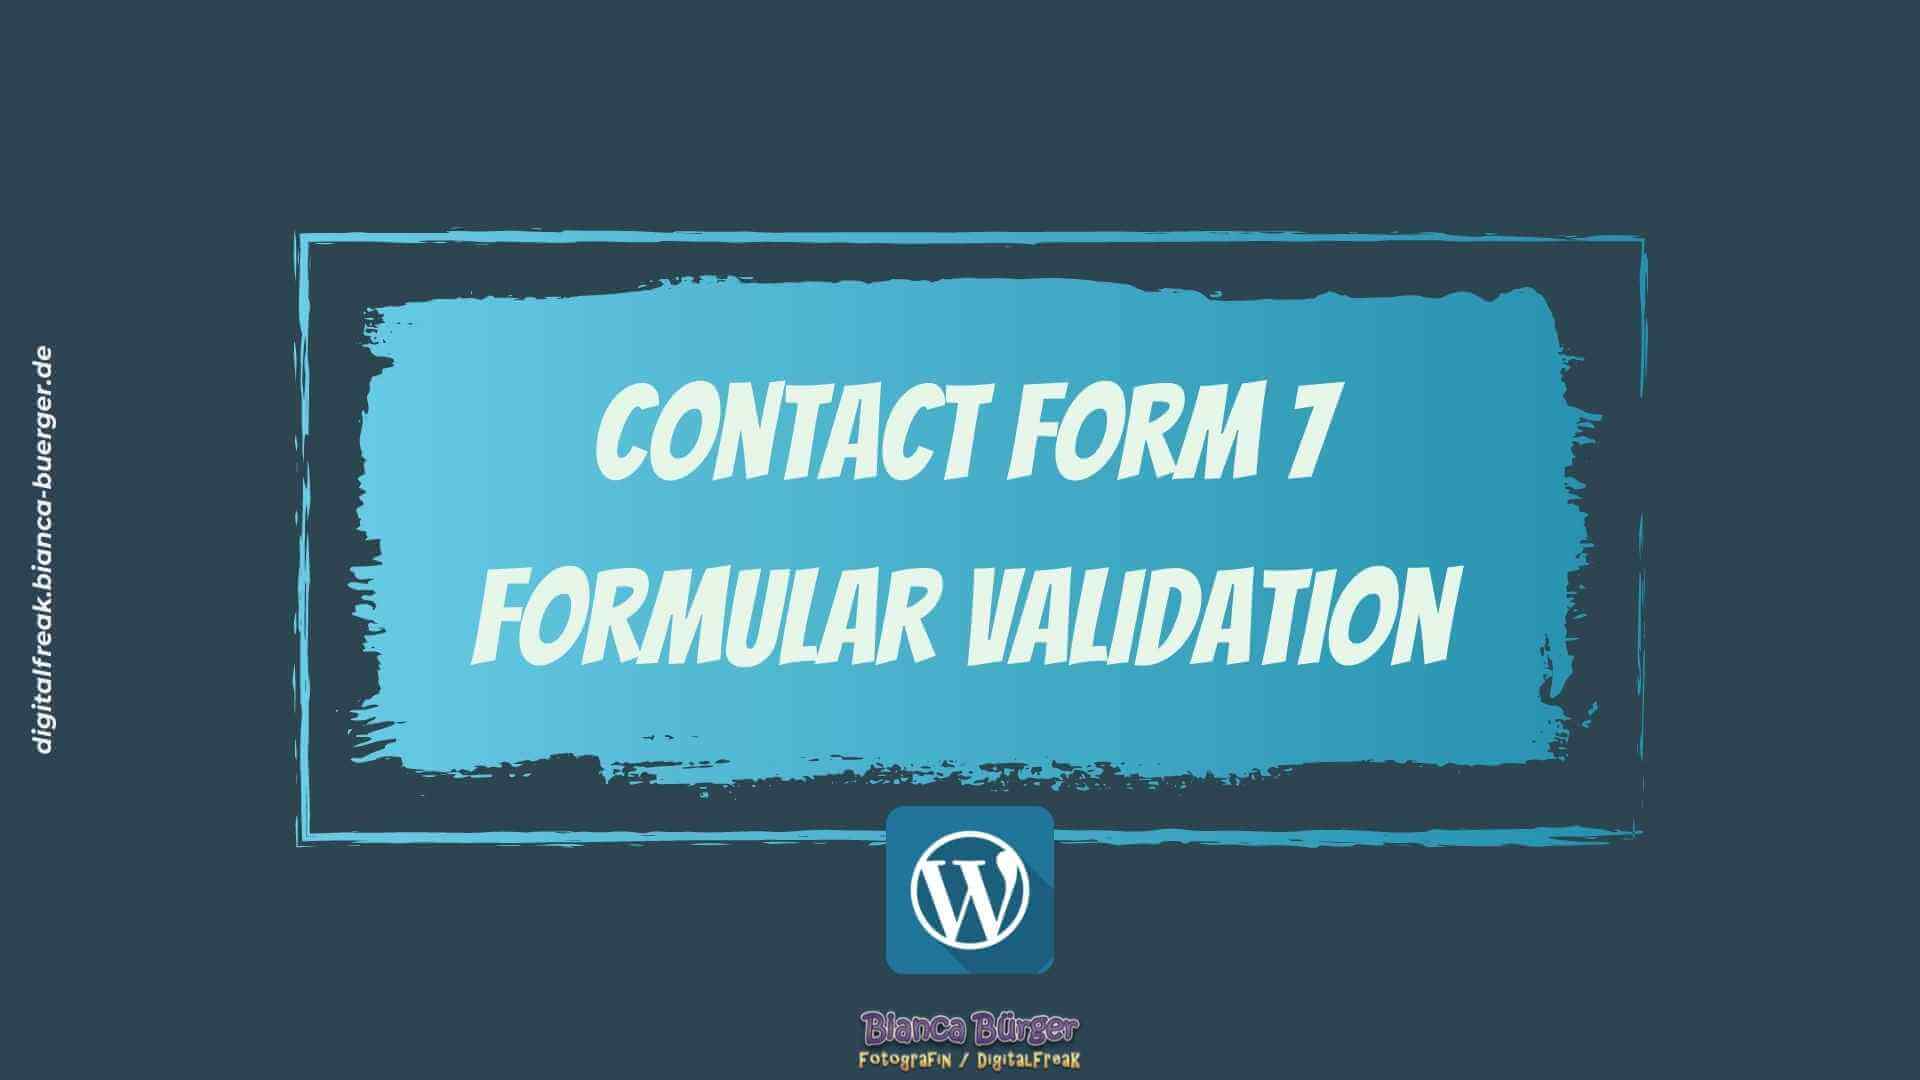 DF_WP_Contact-Form7- Formular-Validation_1920px